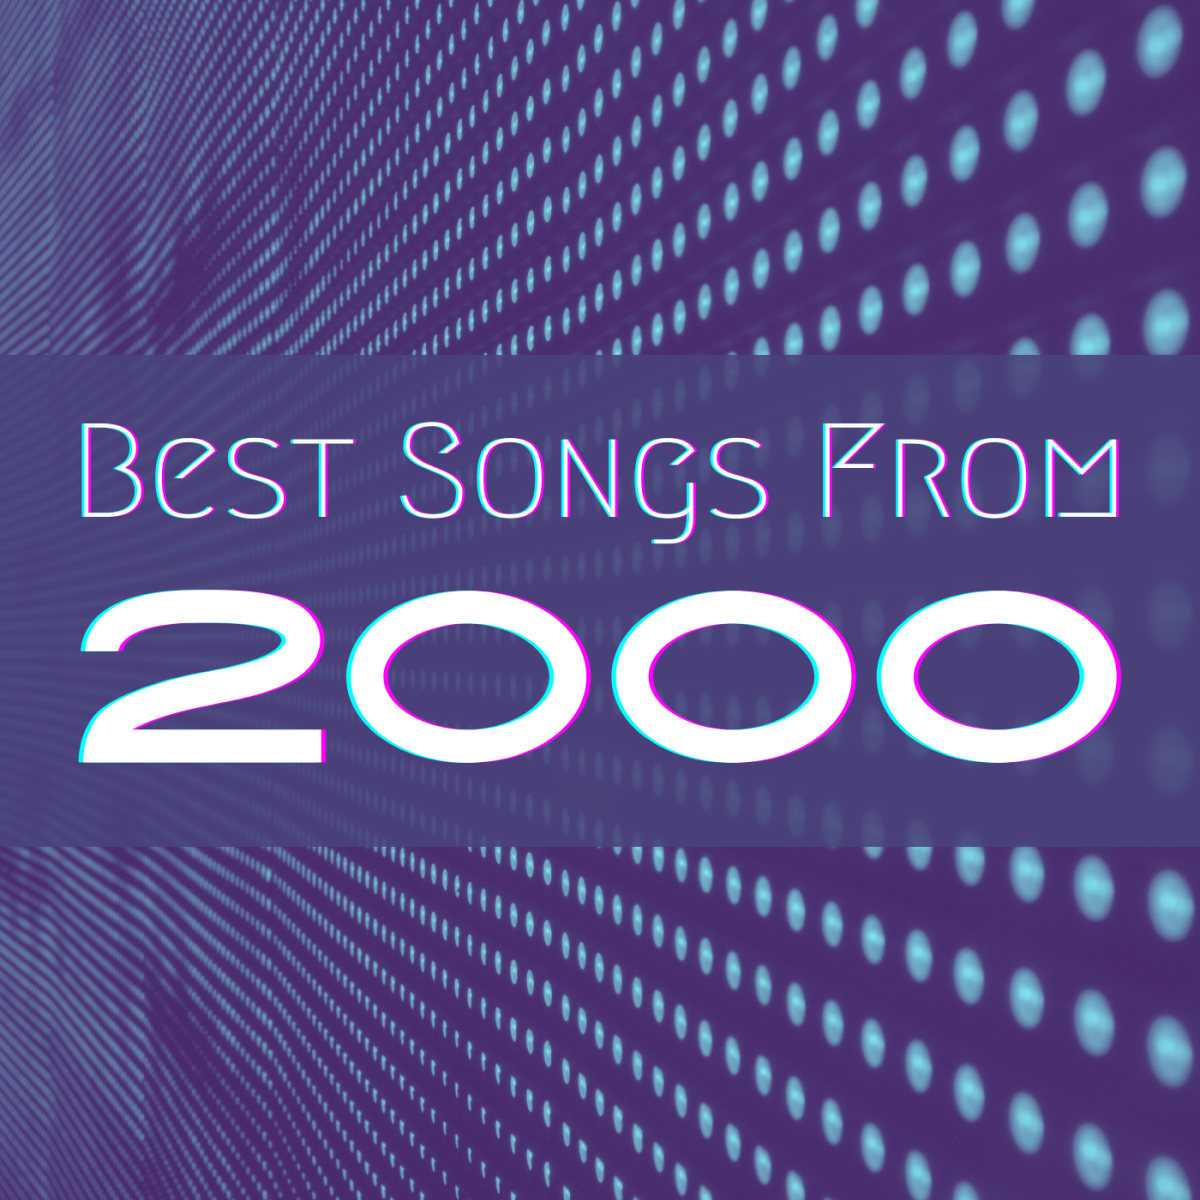 Top 10 Songs From the Year 2000 (With Videos)